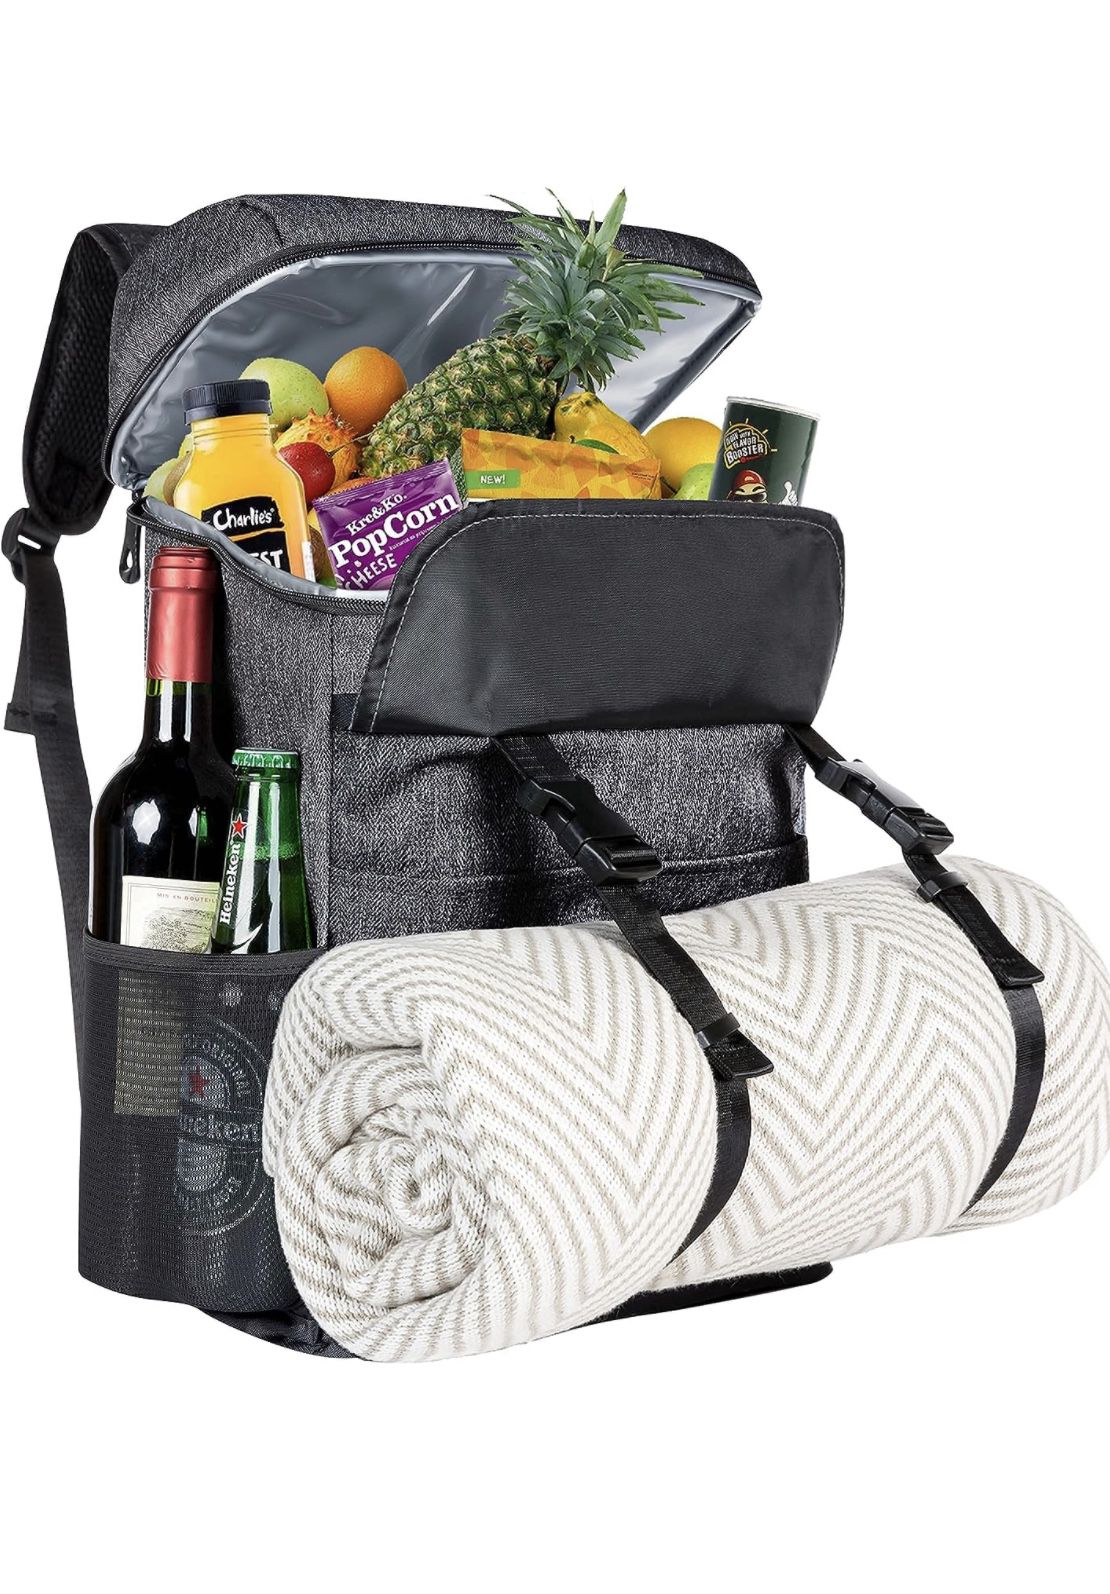 Picnic Basket, Picnic Backpack, with Cooler Compartment, Insulated, Leak Proof, Waterproof, Picnic Bag,Picnic Baskets for 2 to 4, Large Capacity 7.1 G